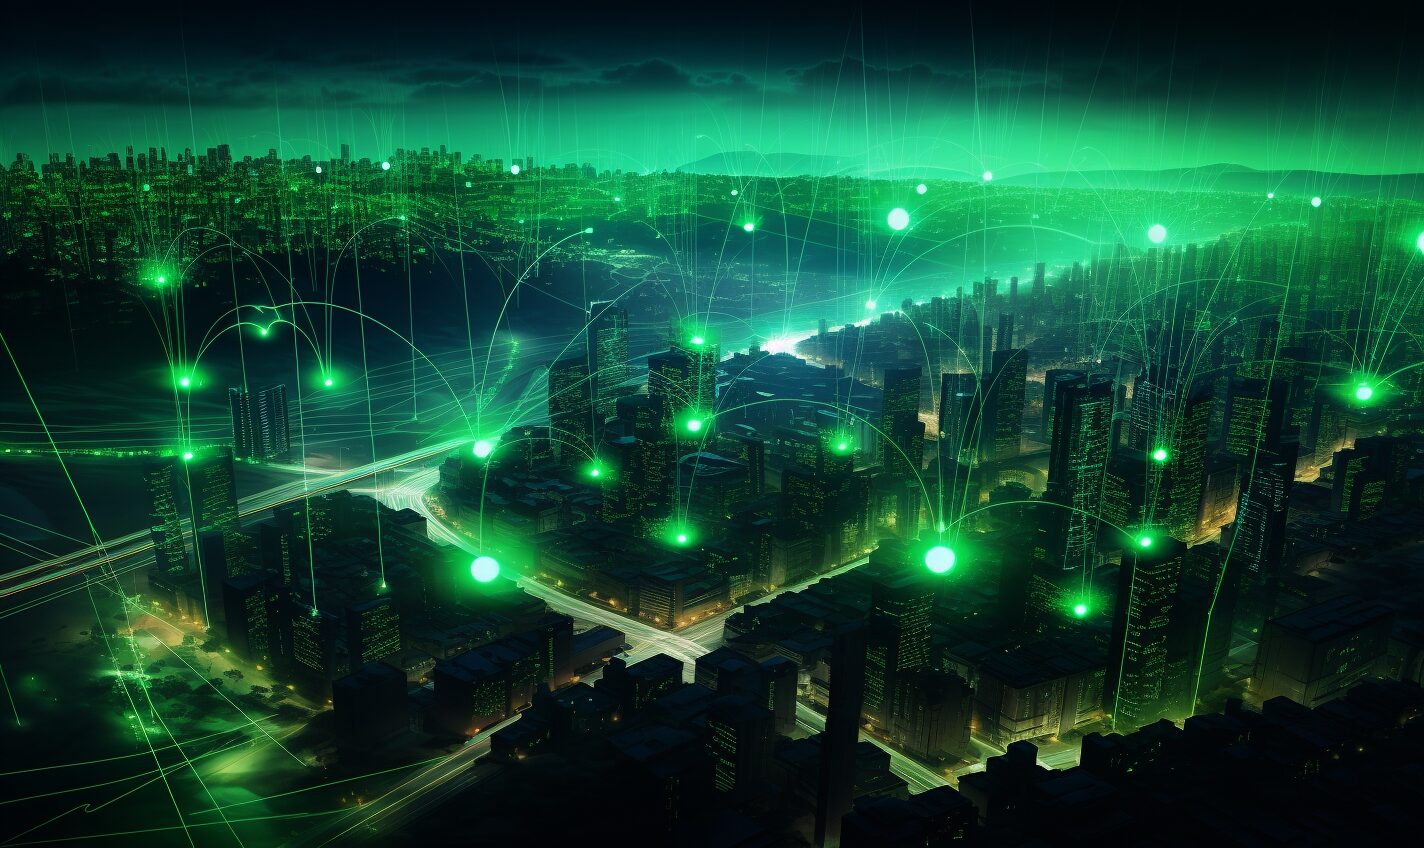 wifi signals bounce across a city with a futuristic green glow